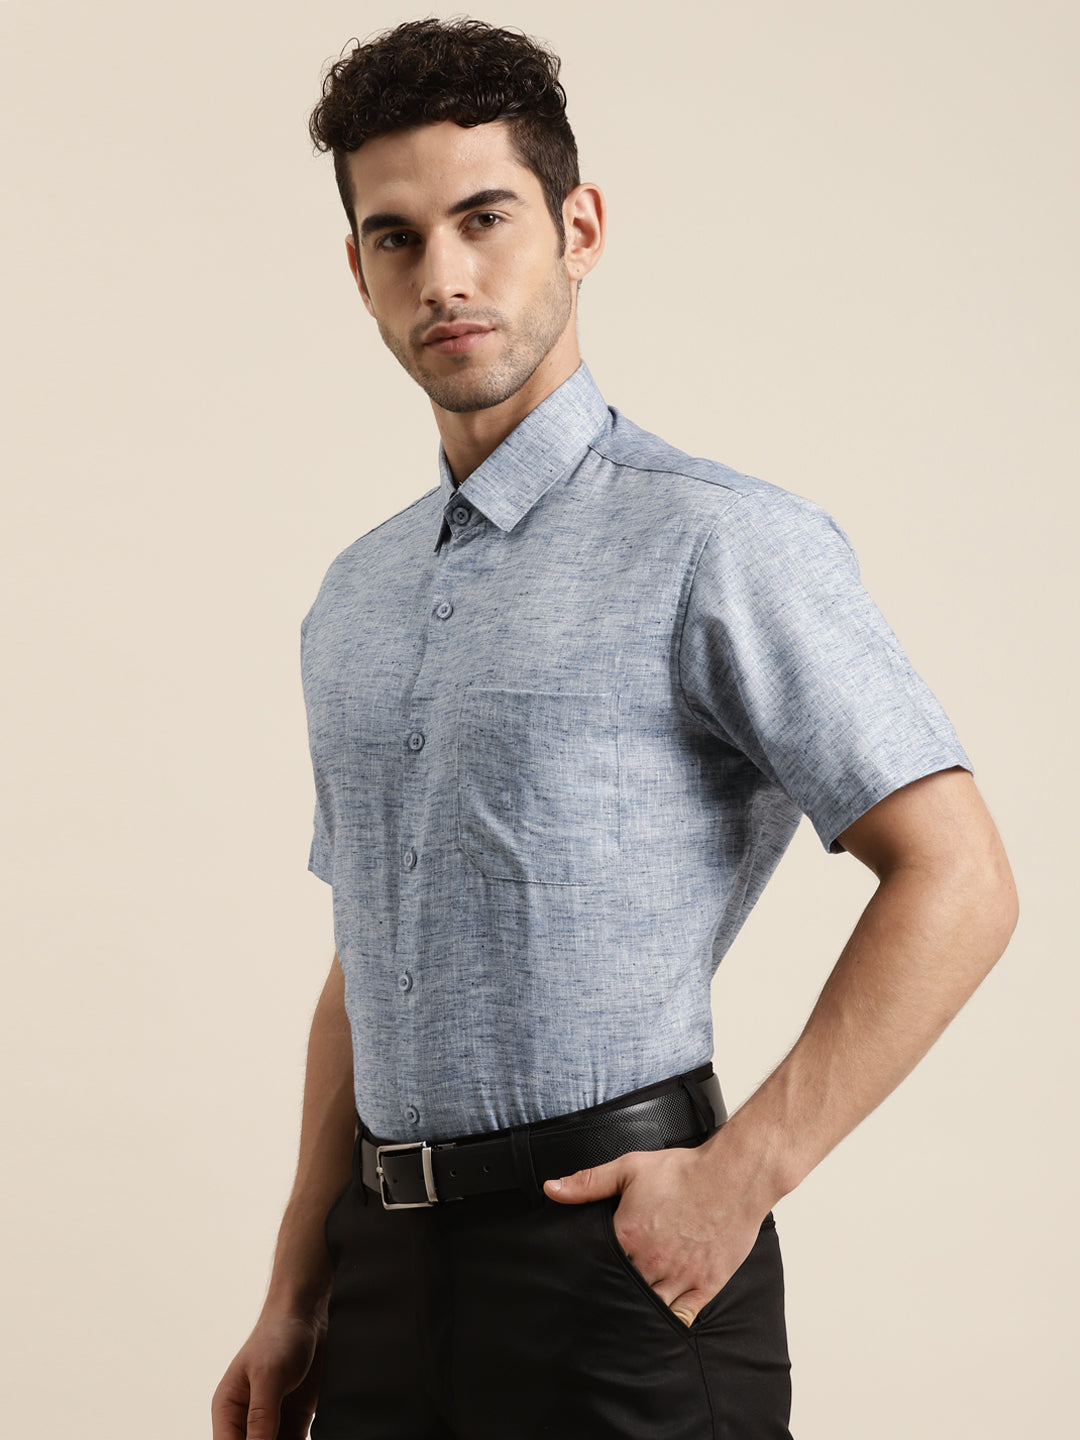 Men's Cotton Blend Russion Blue Half sleeves Casual Shirt